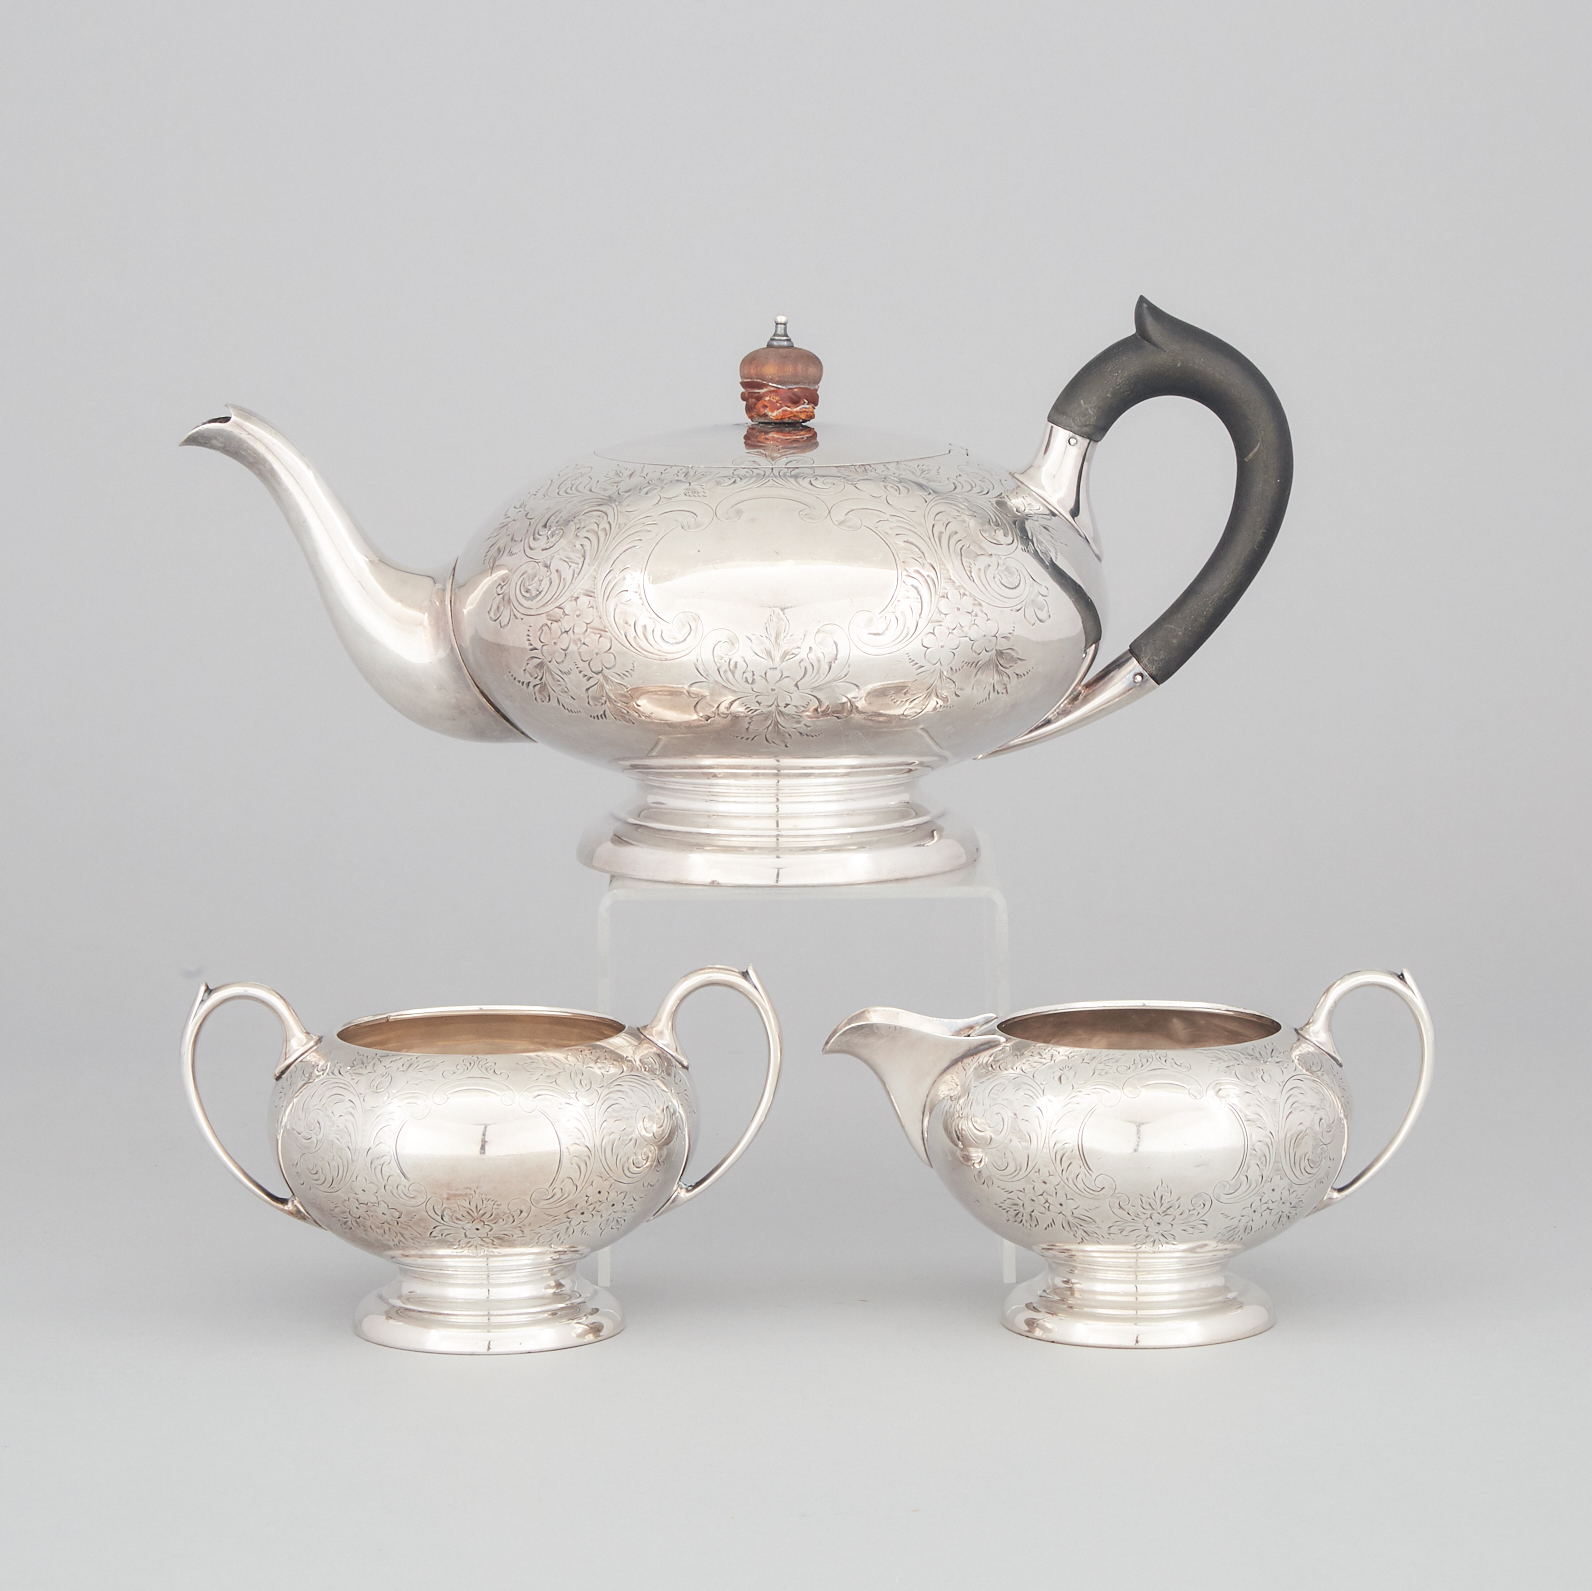 Canadian Silver Tea Service, Henry Birks & Sons, Montreal, Que., 1904-24